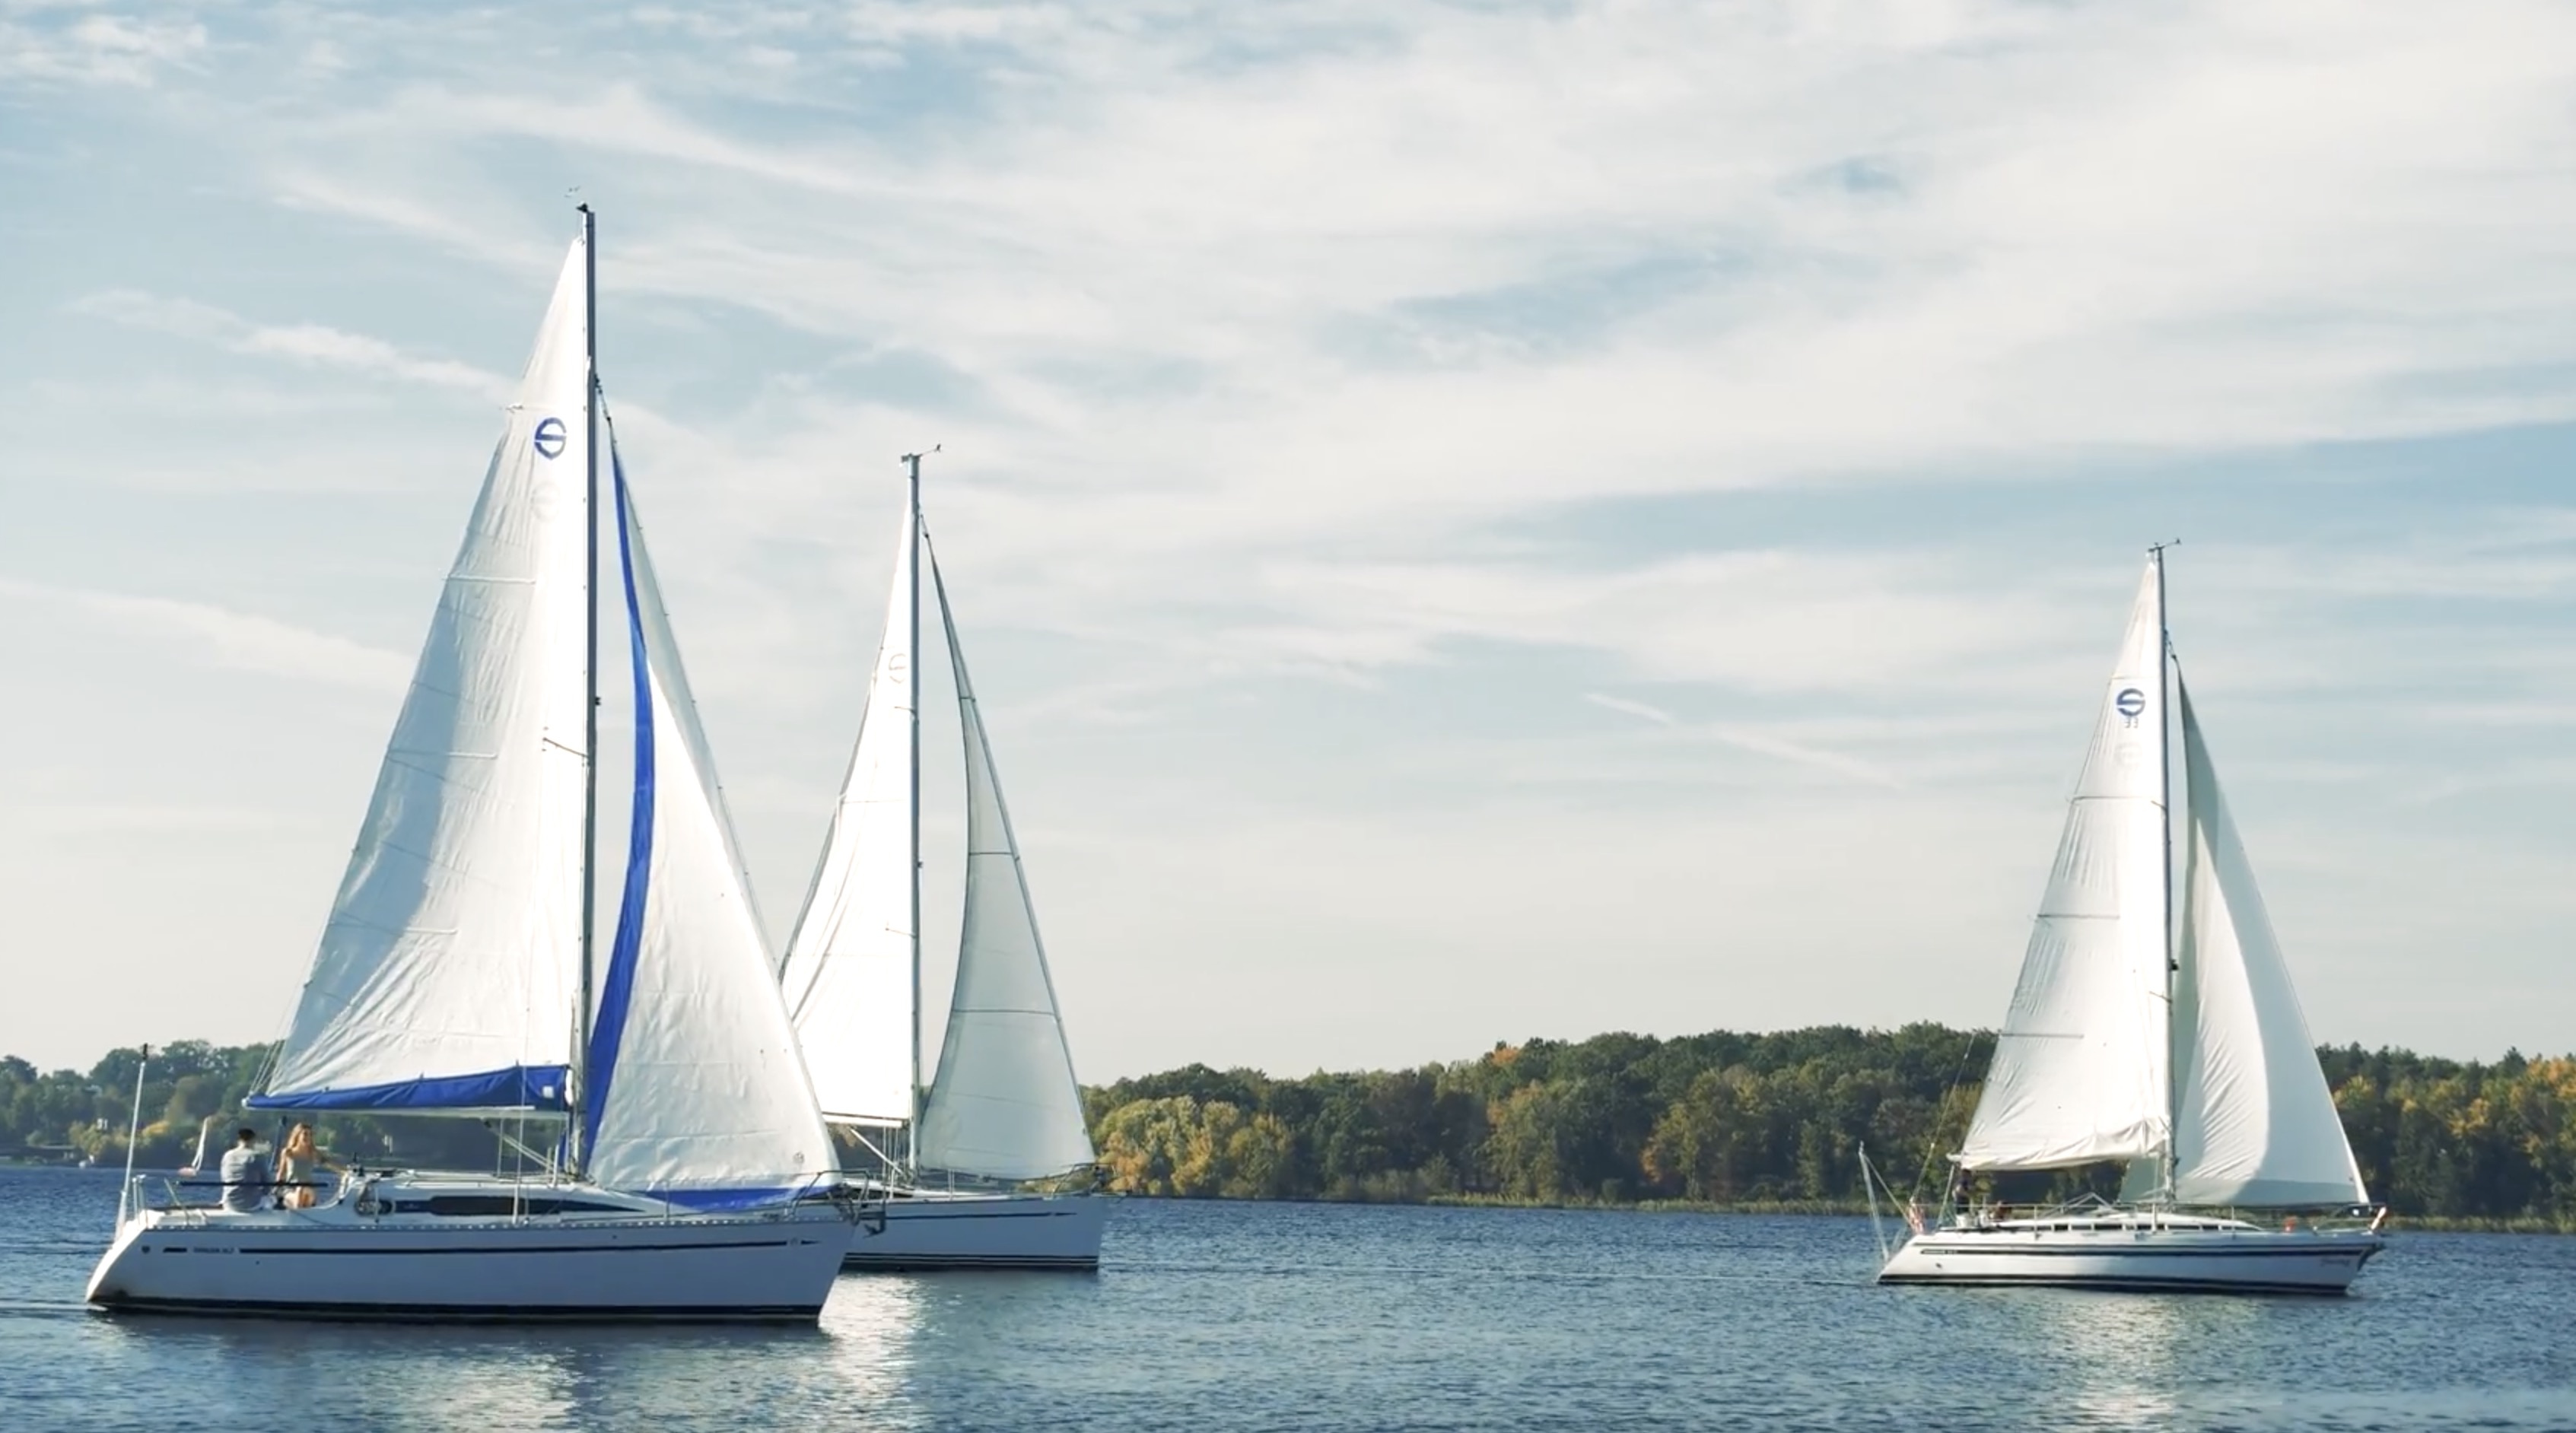 Sailing: Yacht charter, Skippered sailing trip in Berlin, A voyage at the sea. 3390x1890 HD Background.